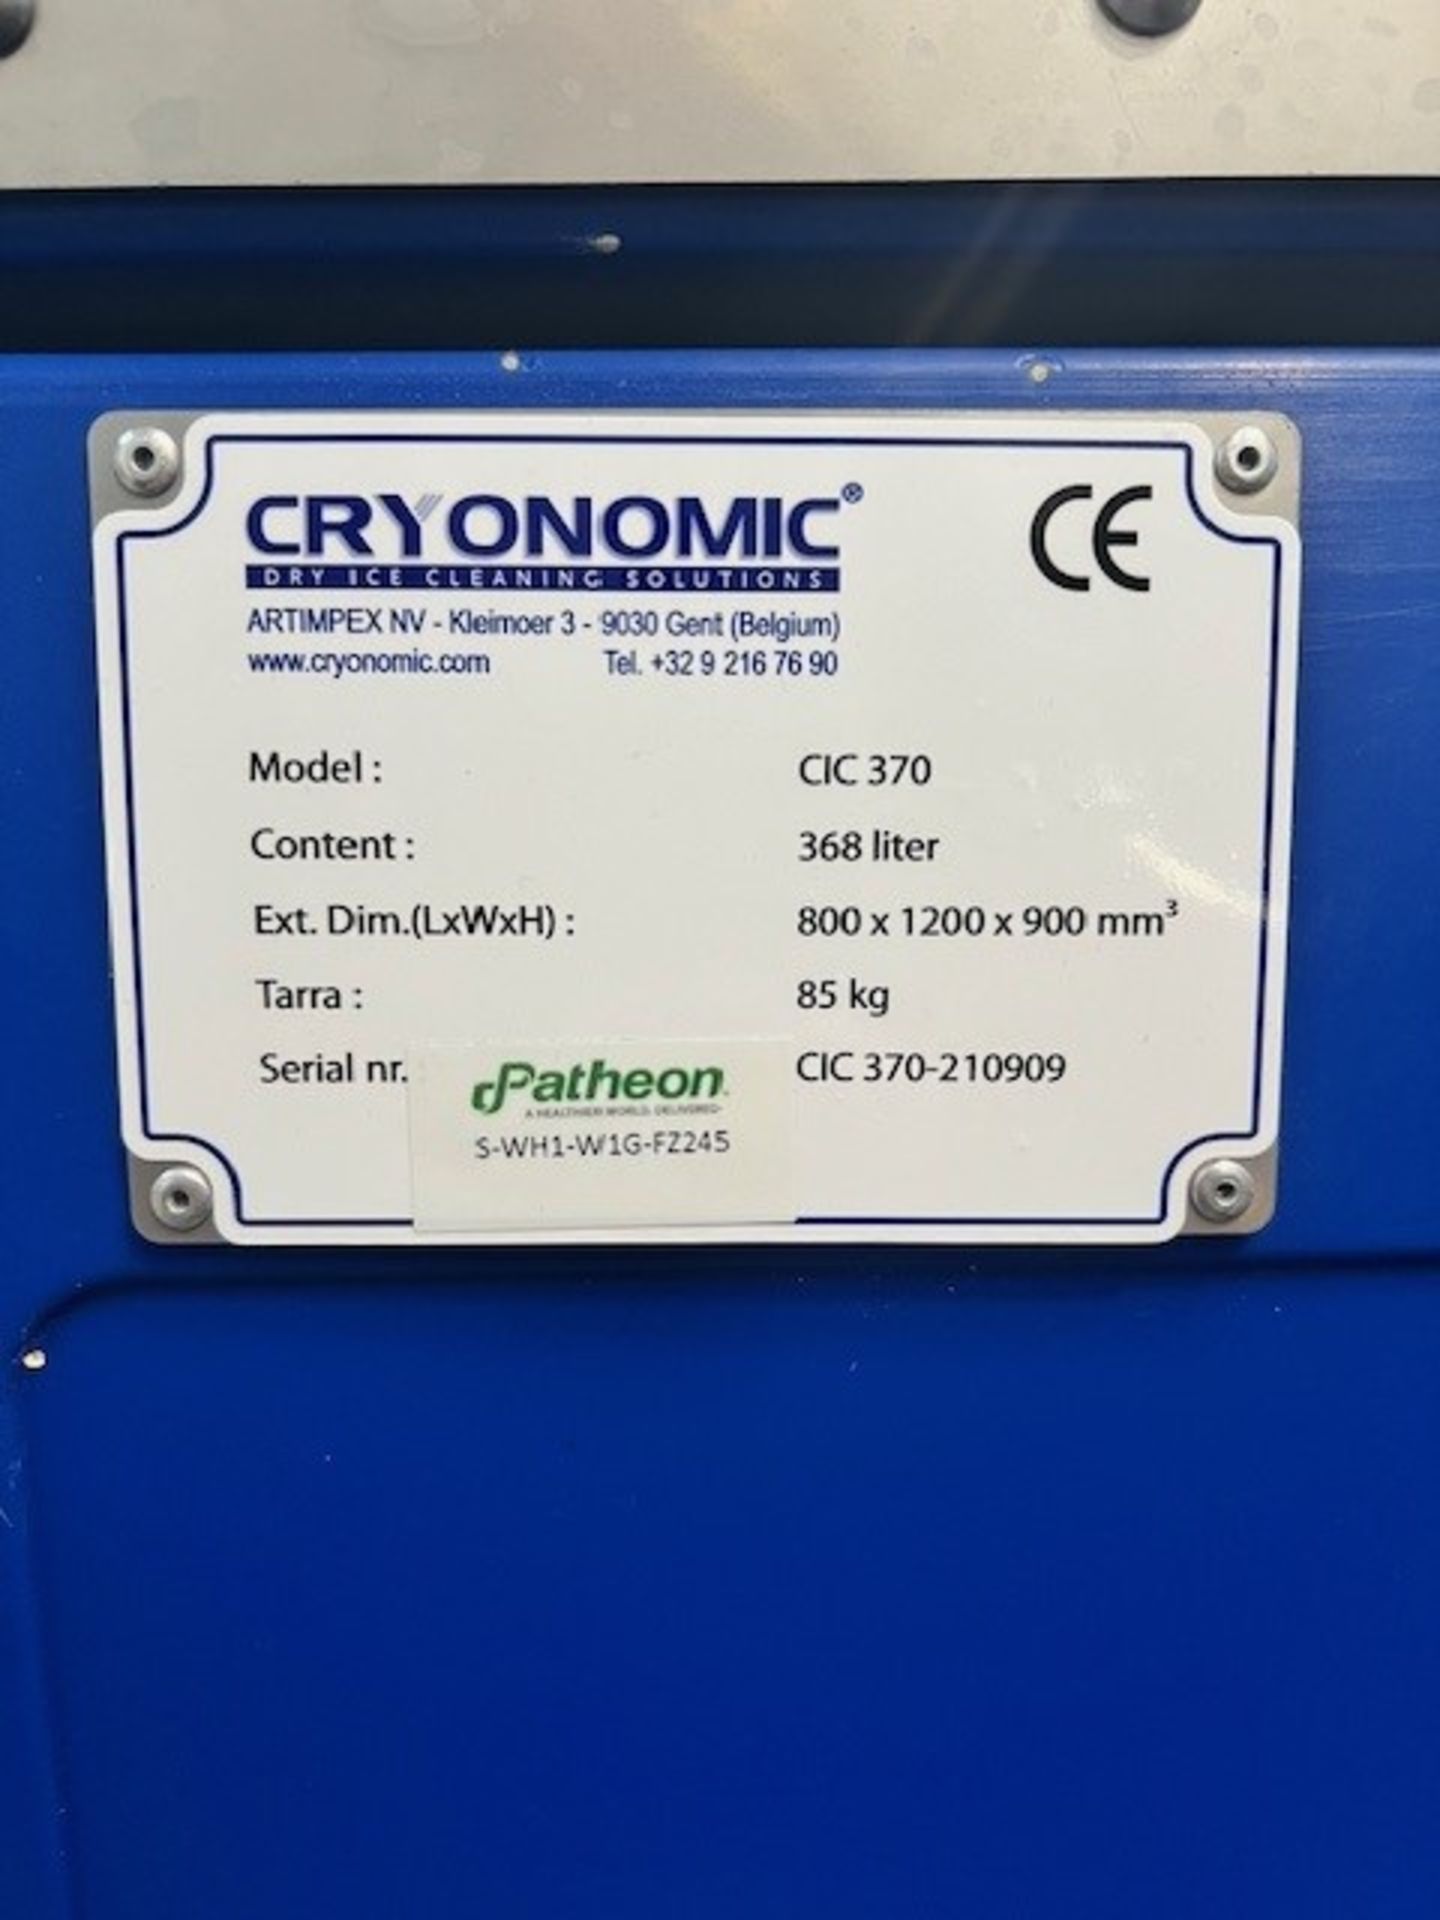 Cyyonomic Dry Ice Cart for cleaning solutions - Image 5 of 5